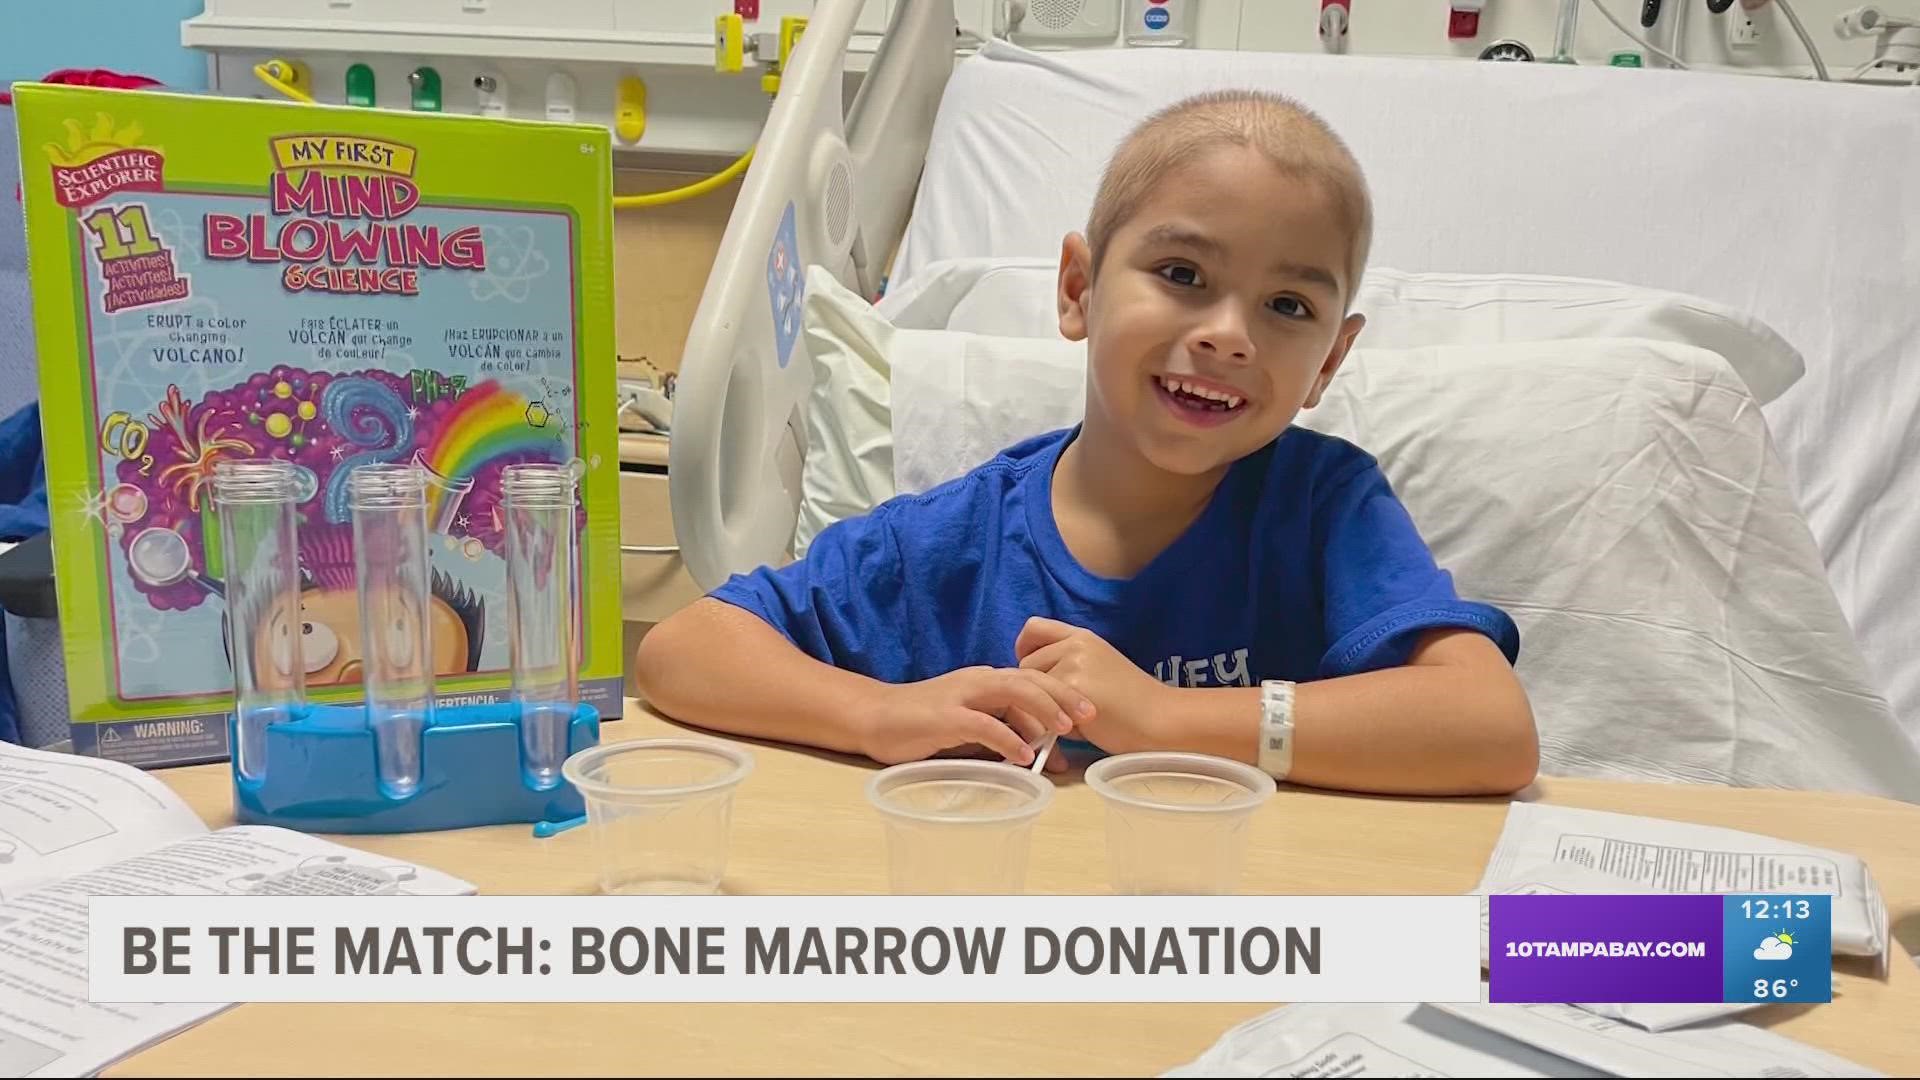 Aiden is still waiting for a full match for a bone marrow transplant.